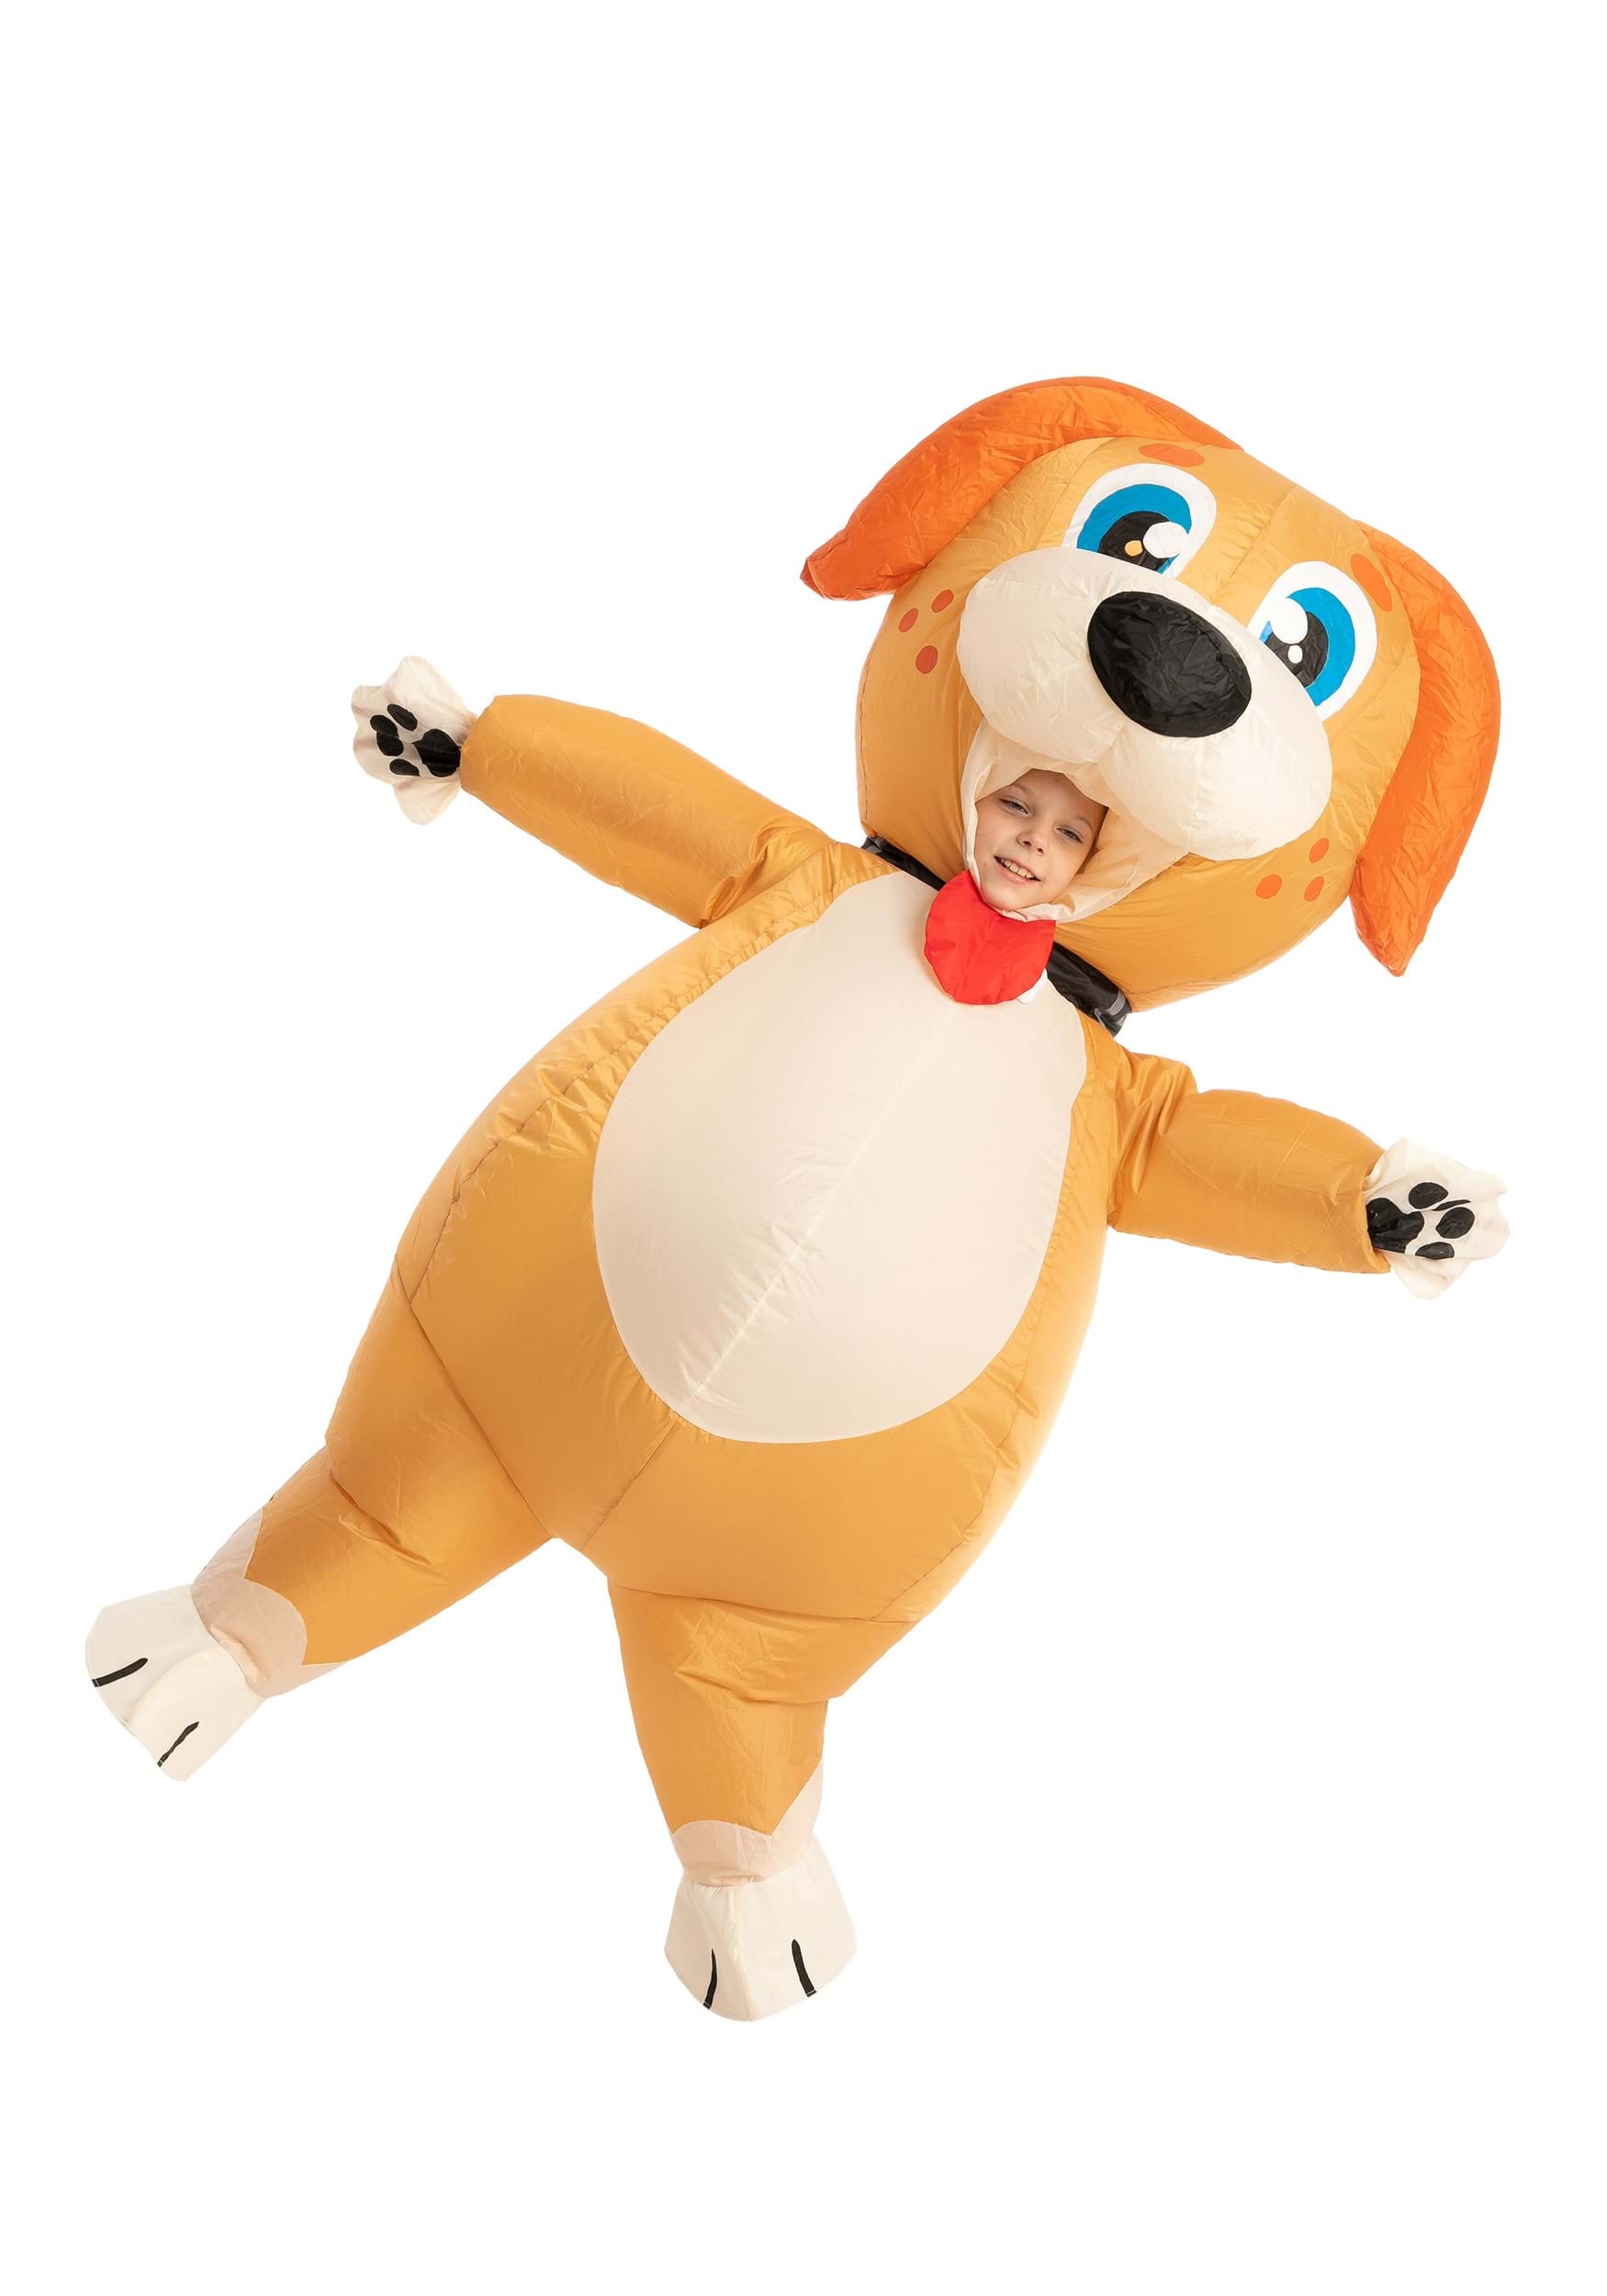 ABOOFAN Inflatable Big Yellow Dog Costume for Kids Children Performance  Funny Cosplay Suit Halloween…See more ABOOFAN Inflatable Big Yellow Dog